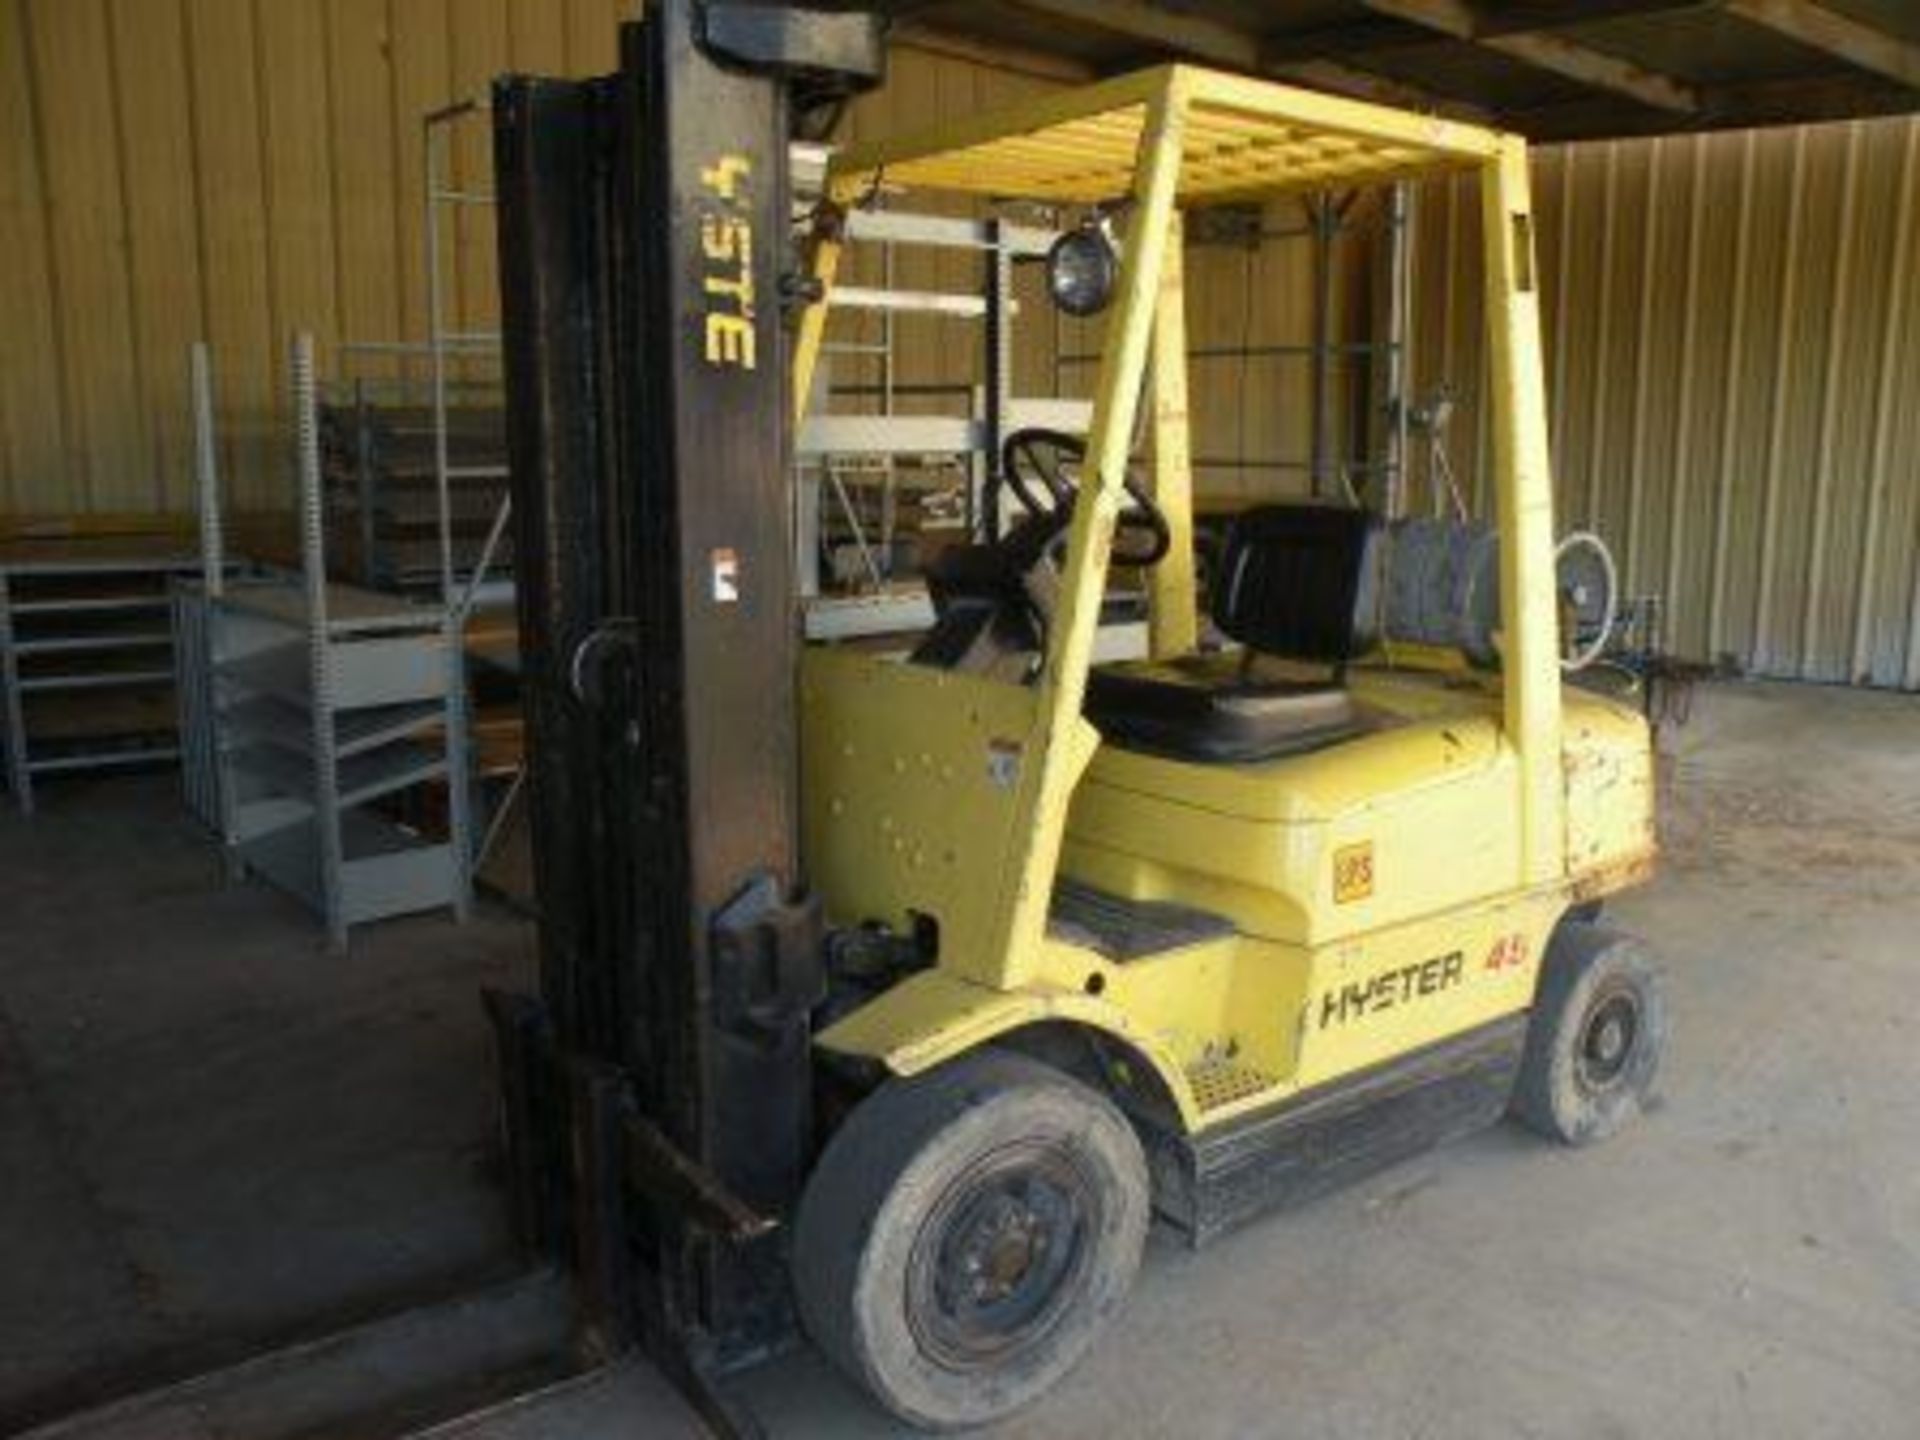 Hyster 45 Cushion Tire Forklift: Uses Propane, Will go on gravel (So. Fulton, TN) - Image 2 of 2